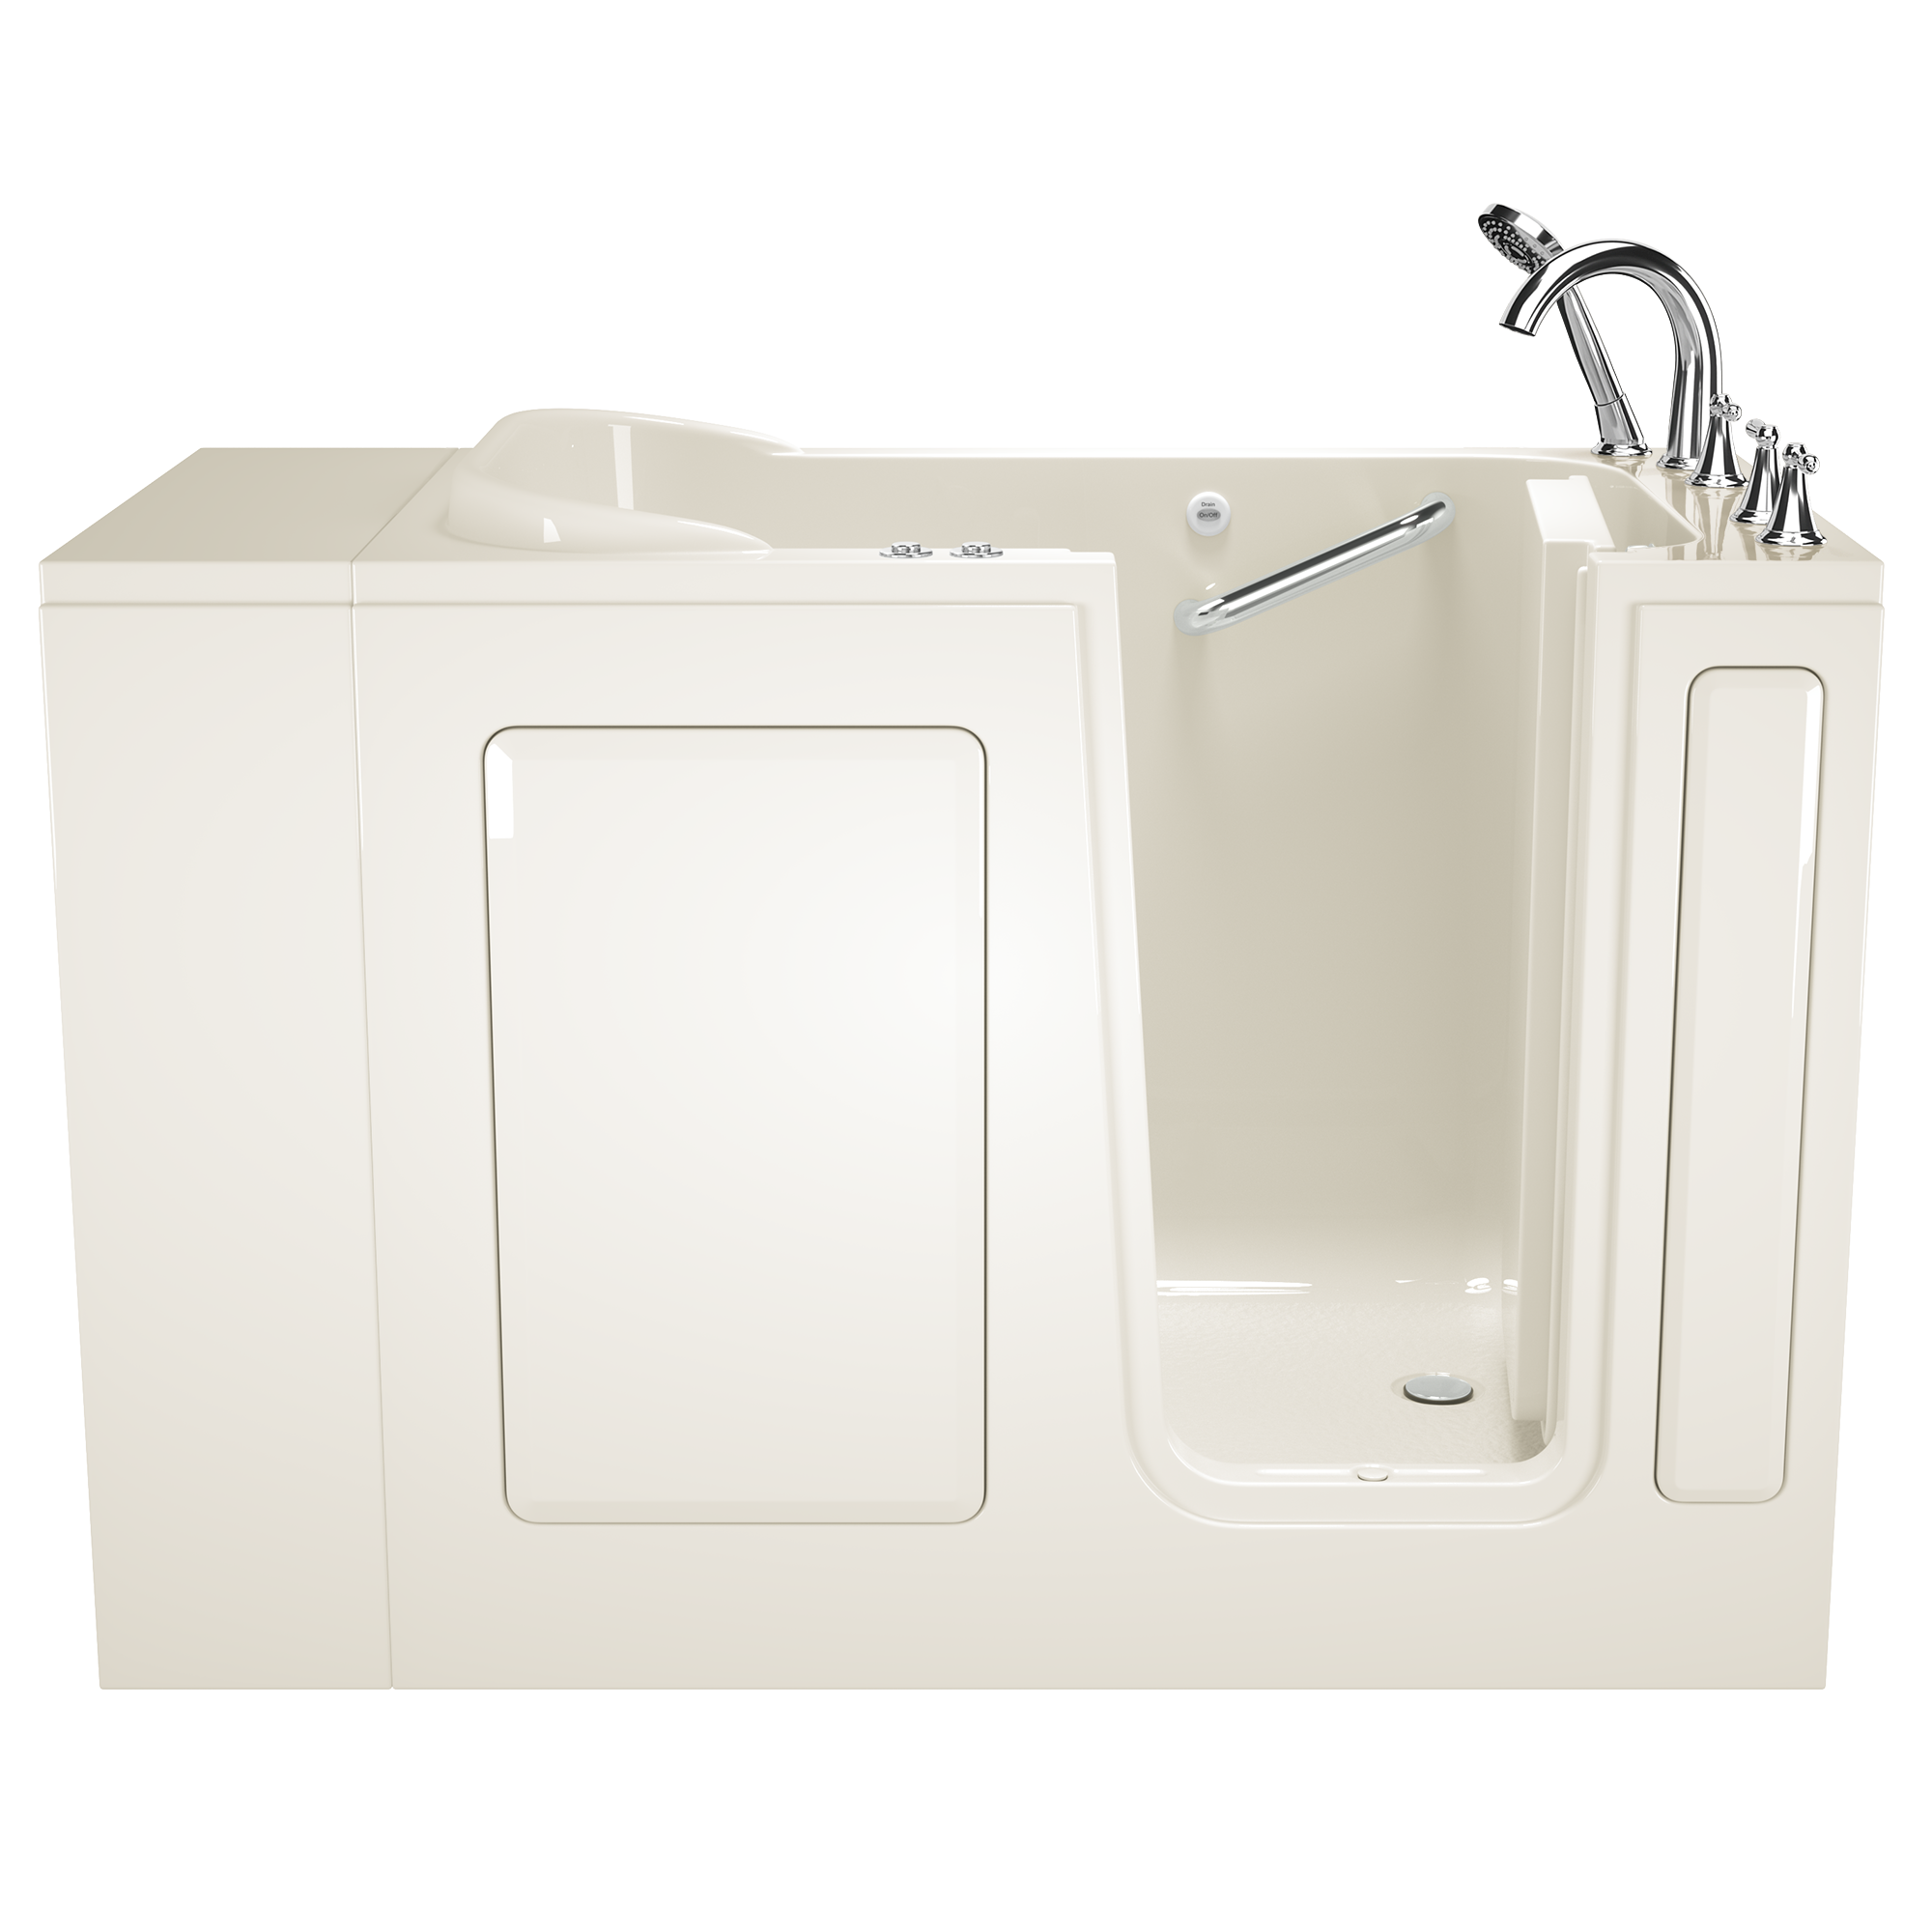 Gelcoat Value Series 28x48-Inch Walk-in Bathtub with Combination Air Spa and Whirlpool System  Right Hand Door and Drain